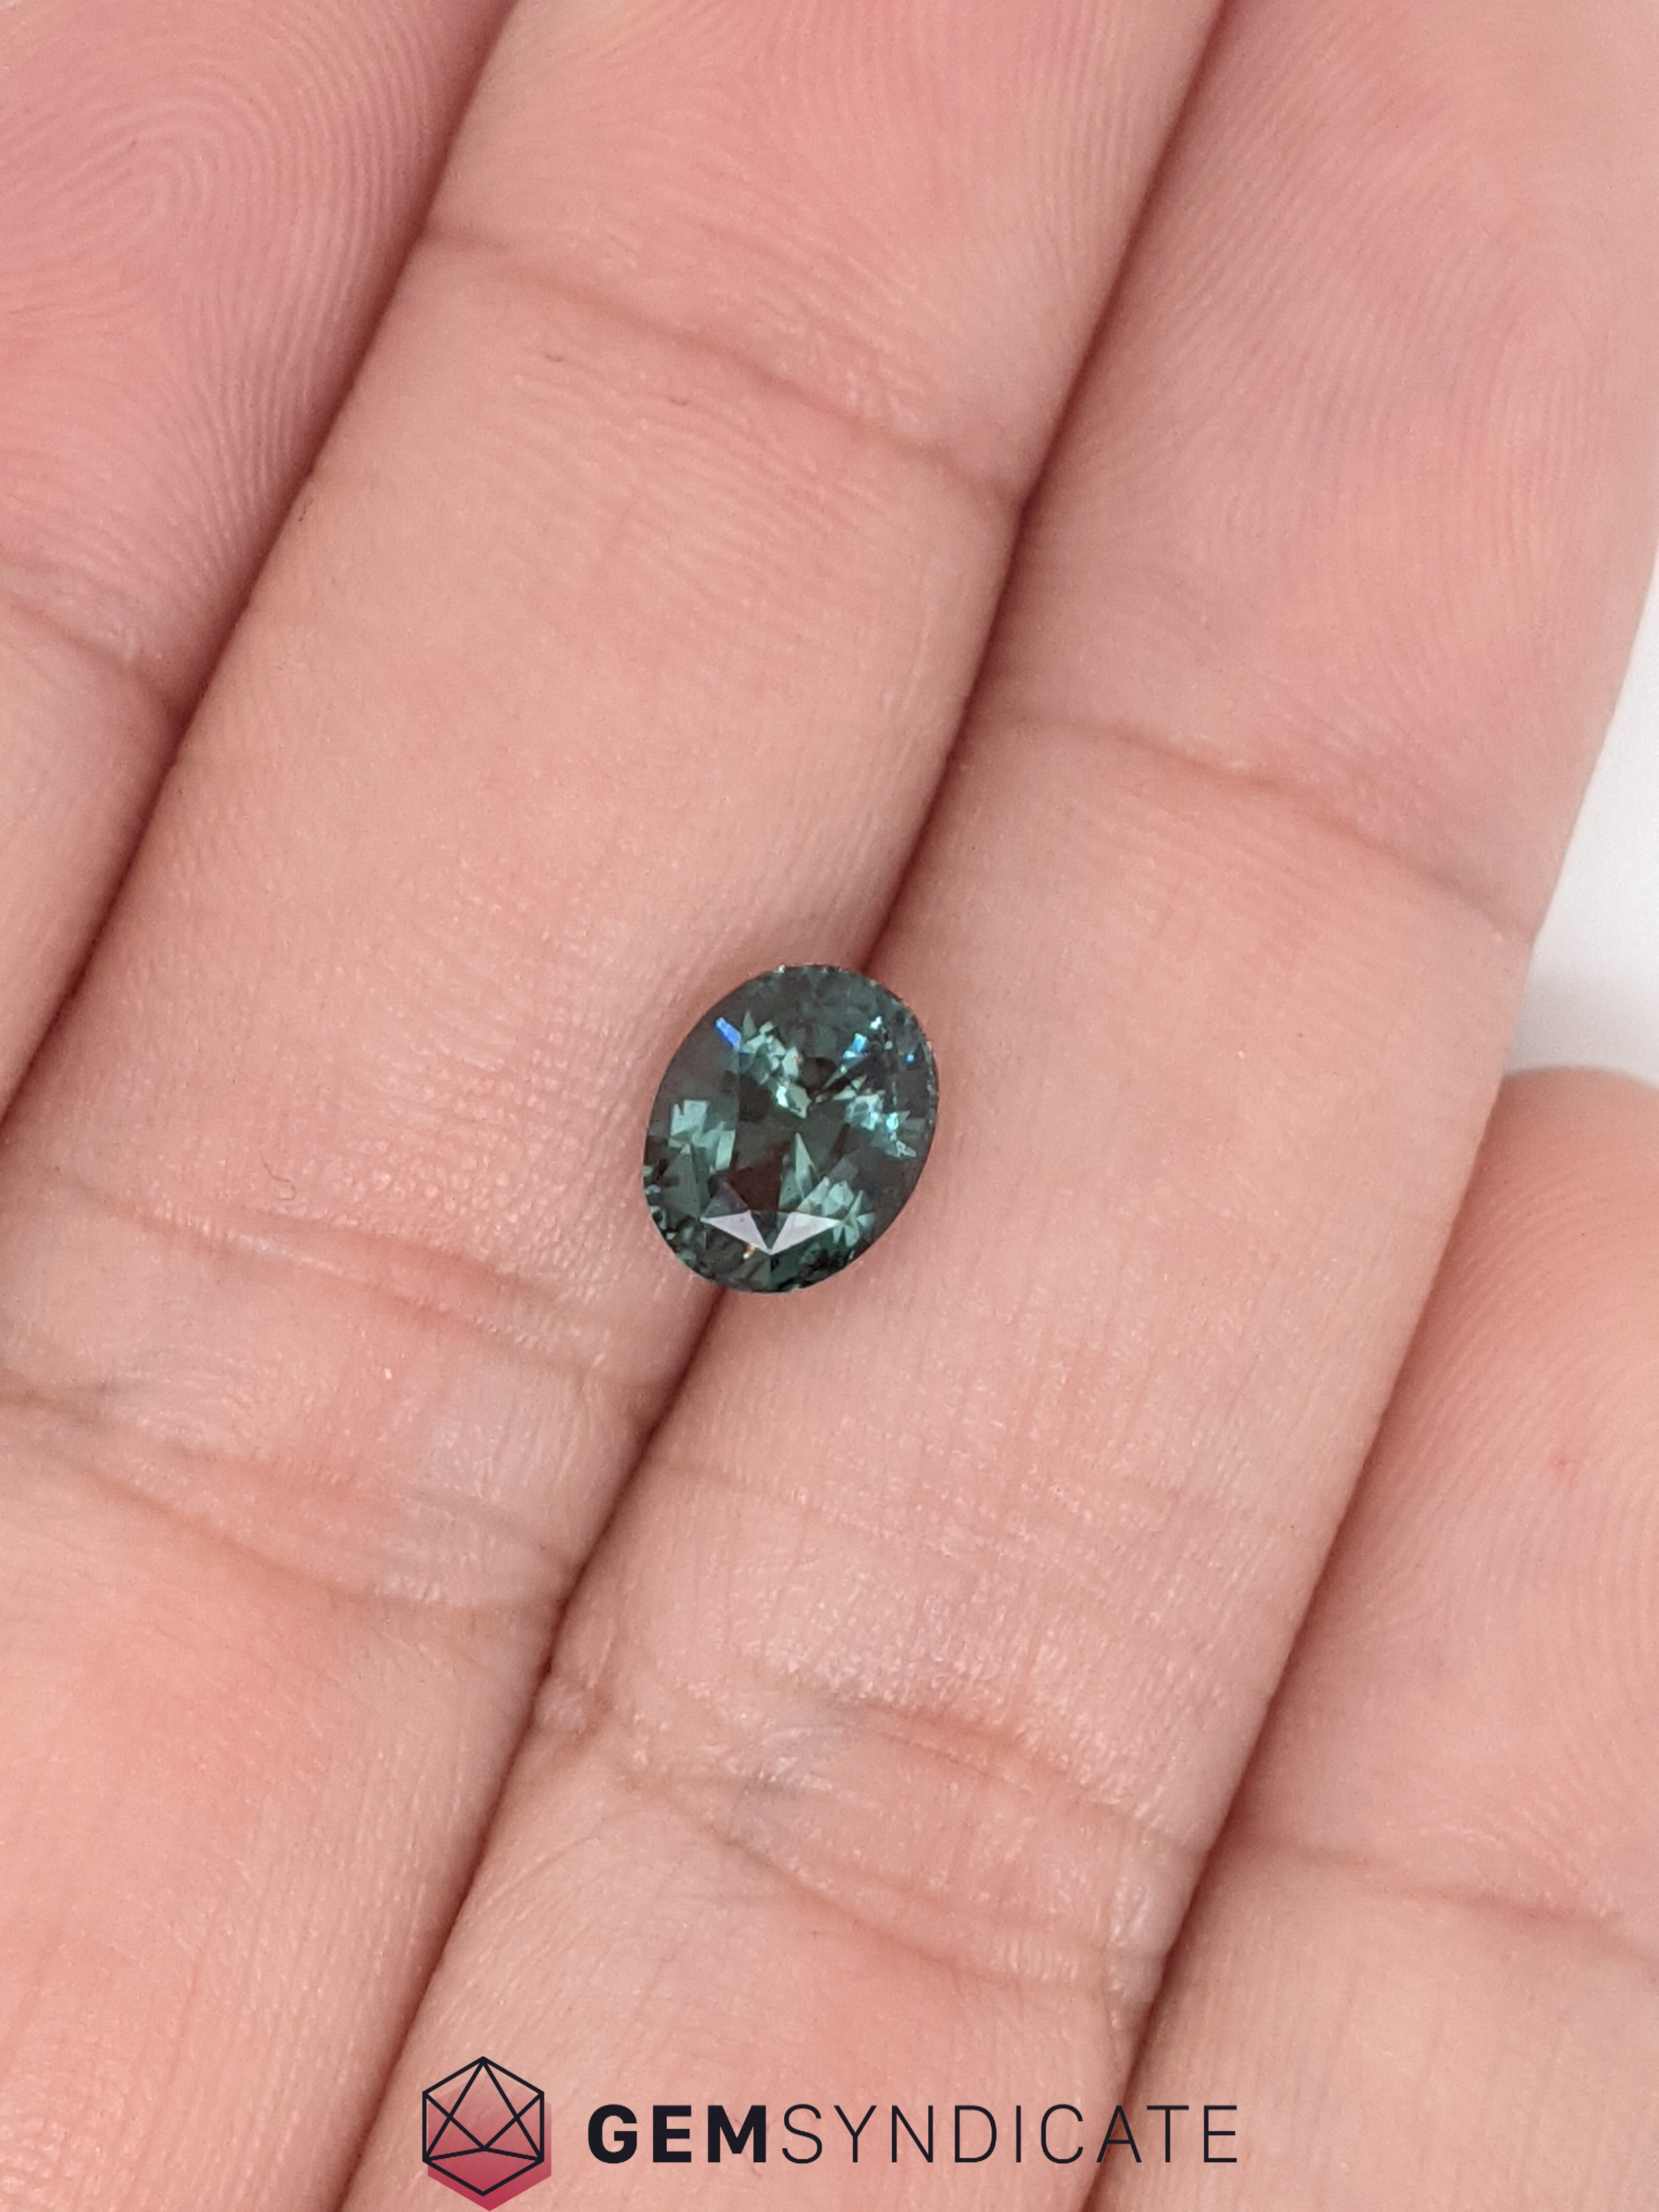 Outstanding Oval Teal Sapphire 1.51ct